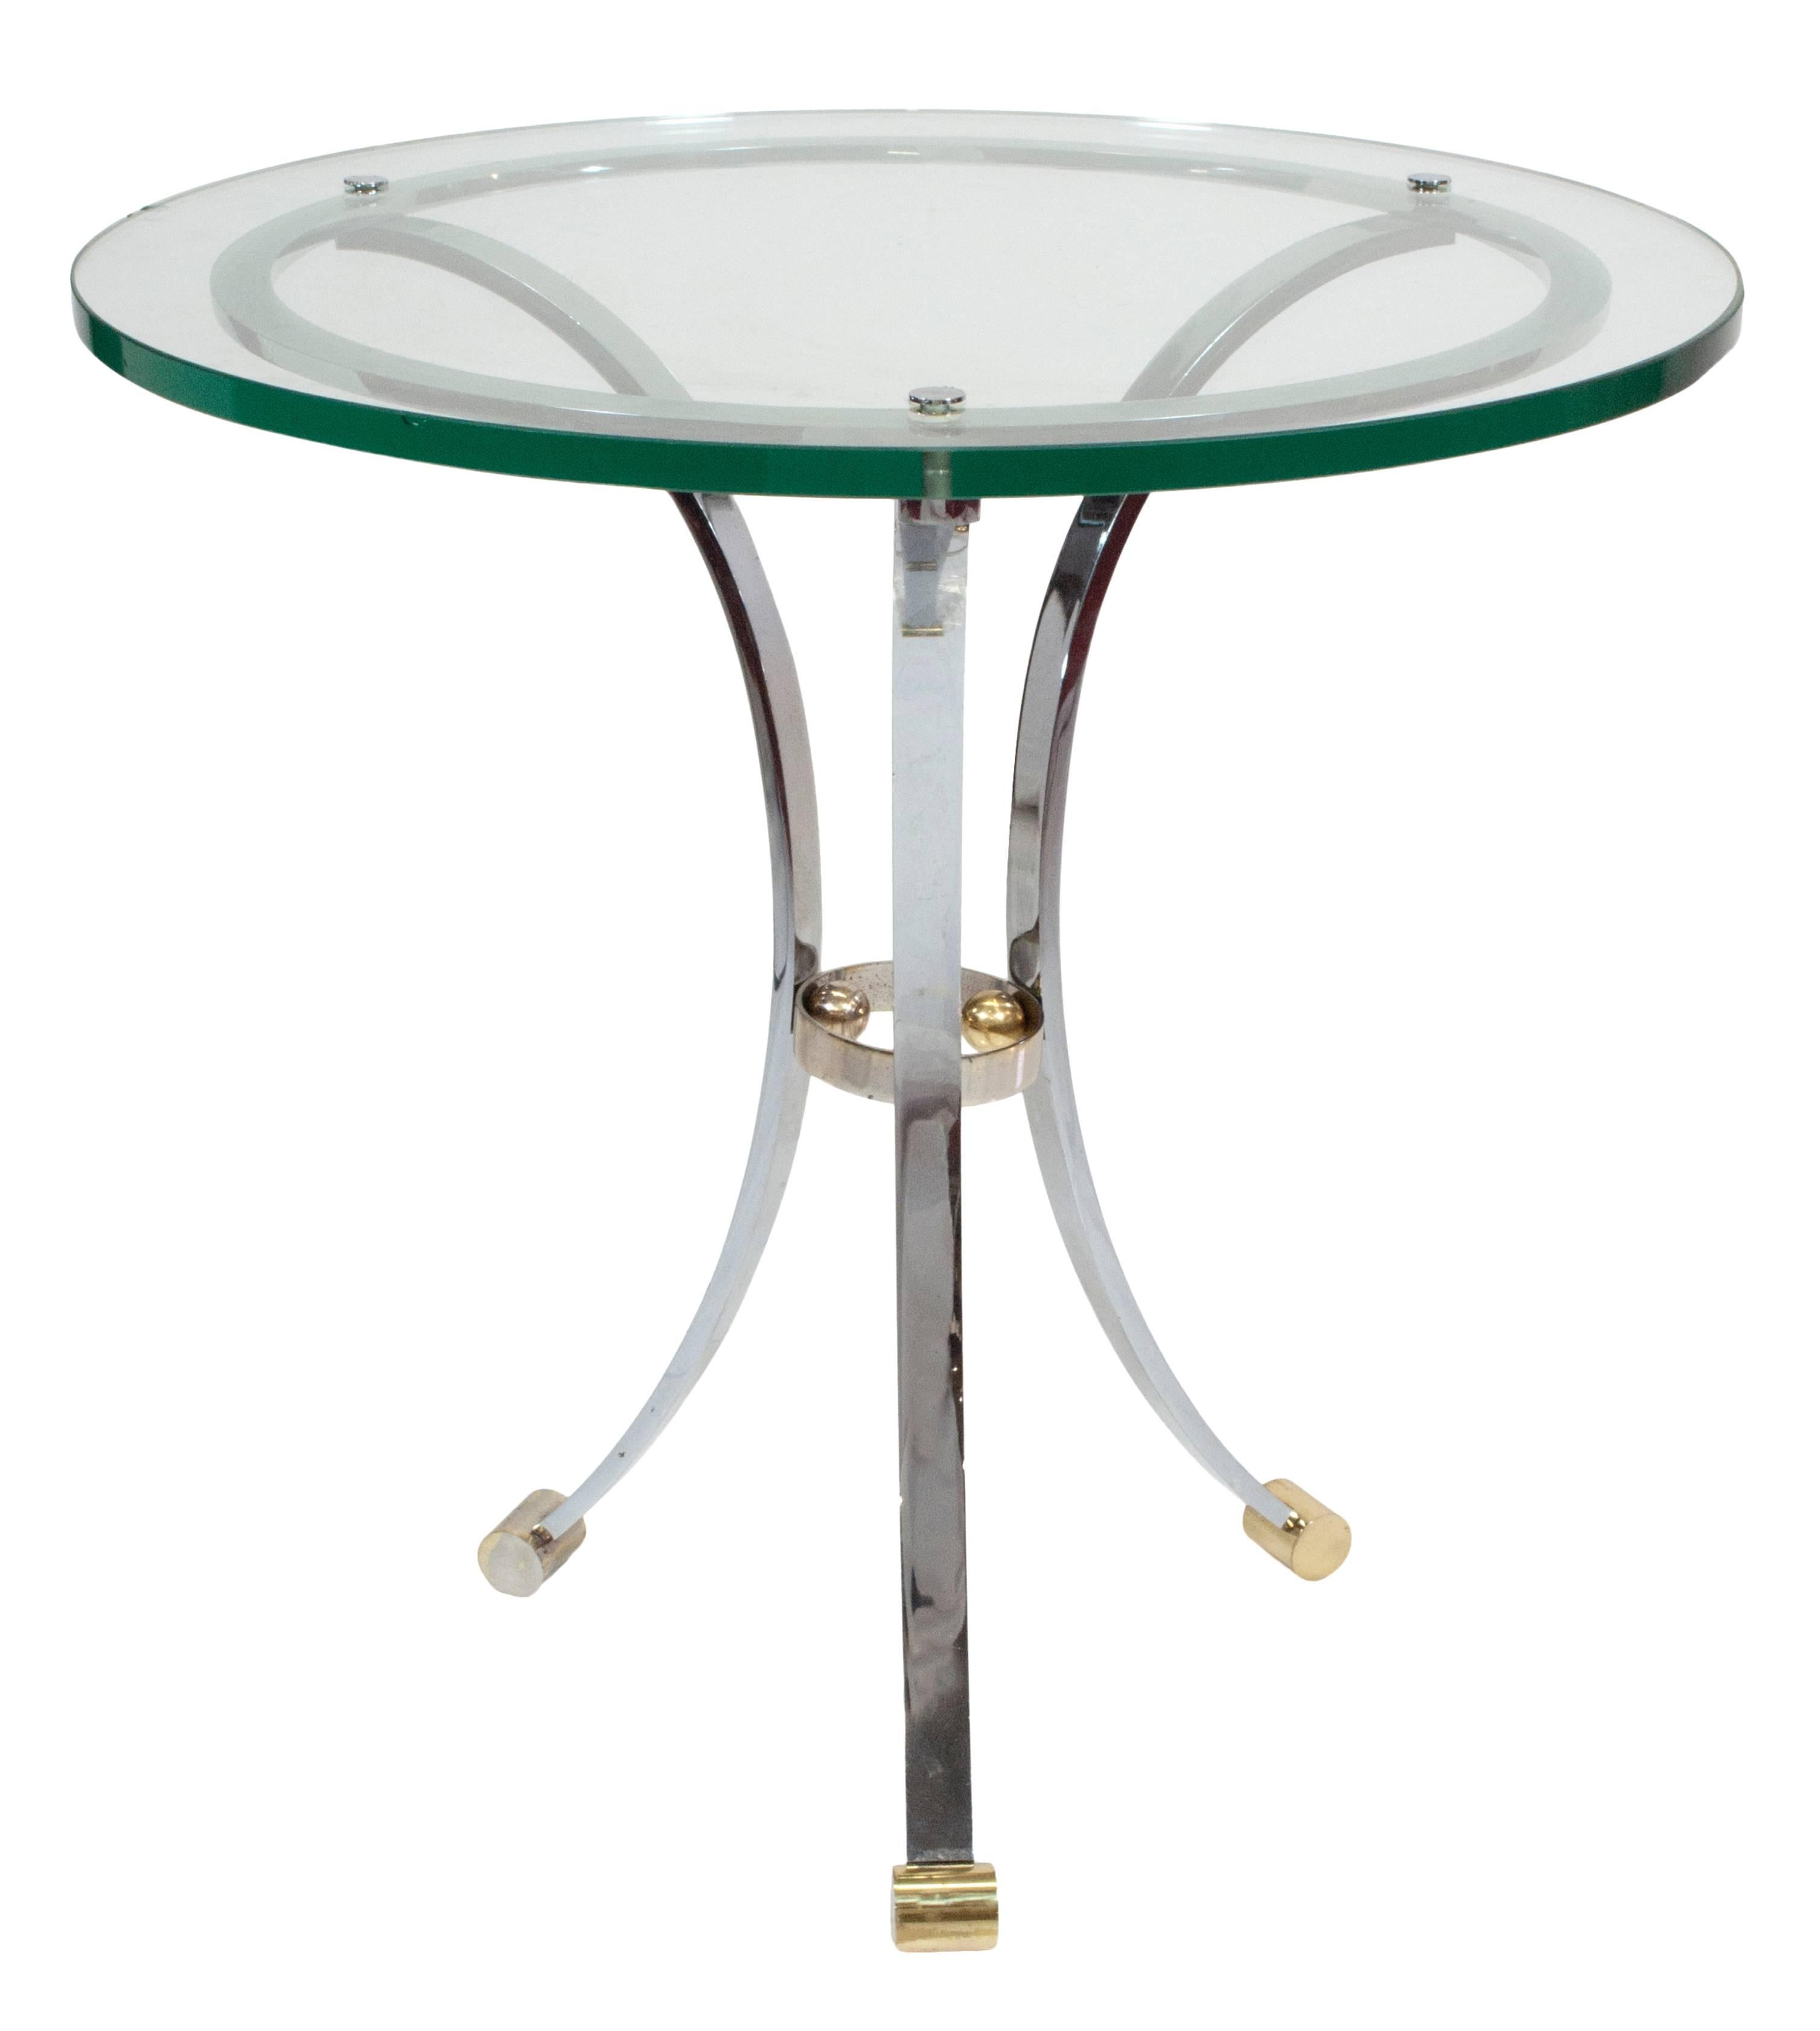 A pair of chrome and glass gueridons with brass detail at the feet and center support.
Minor chips on the edge of one glass top. Photo attached.